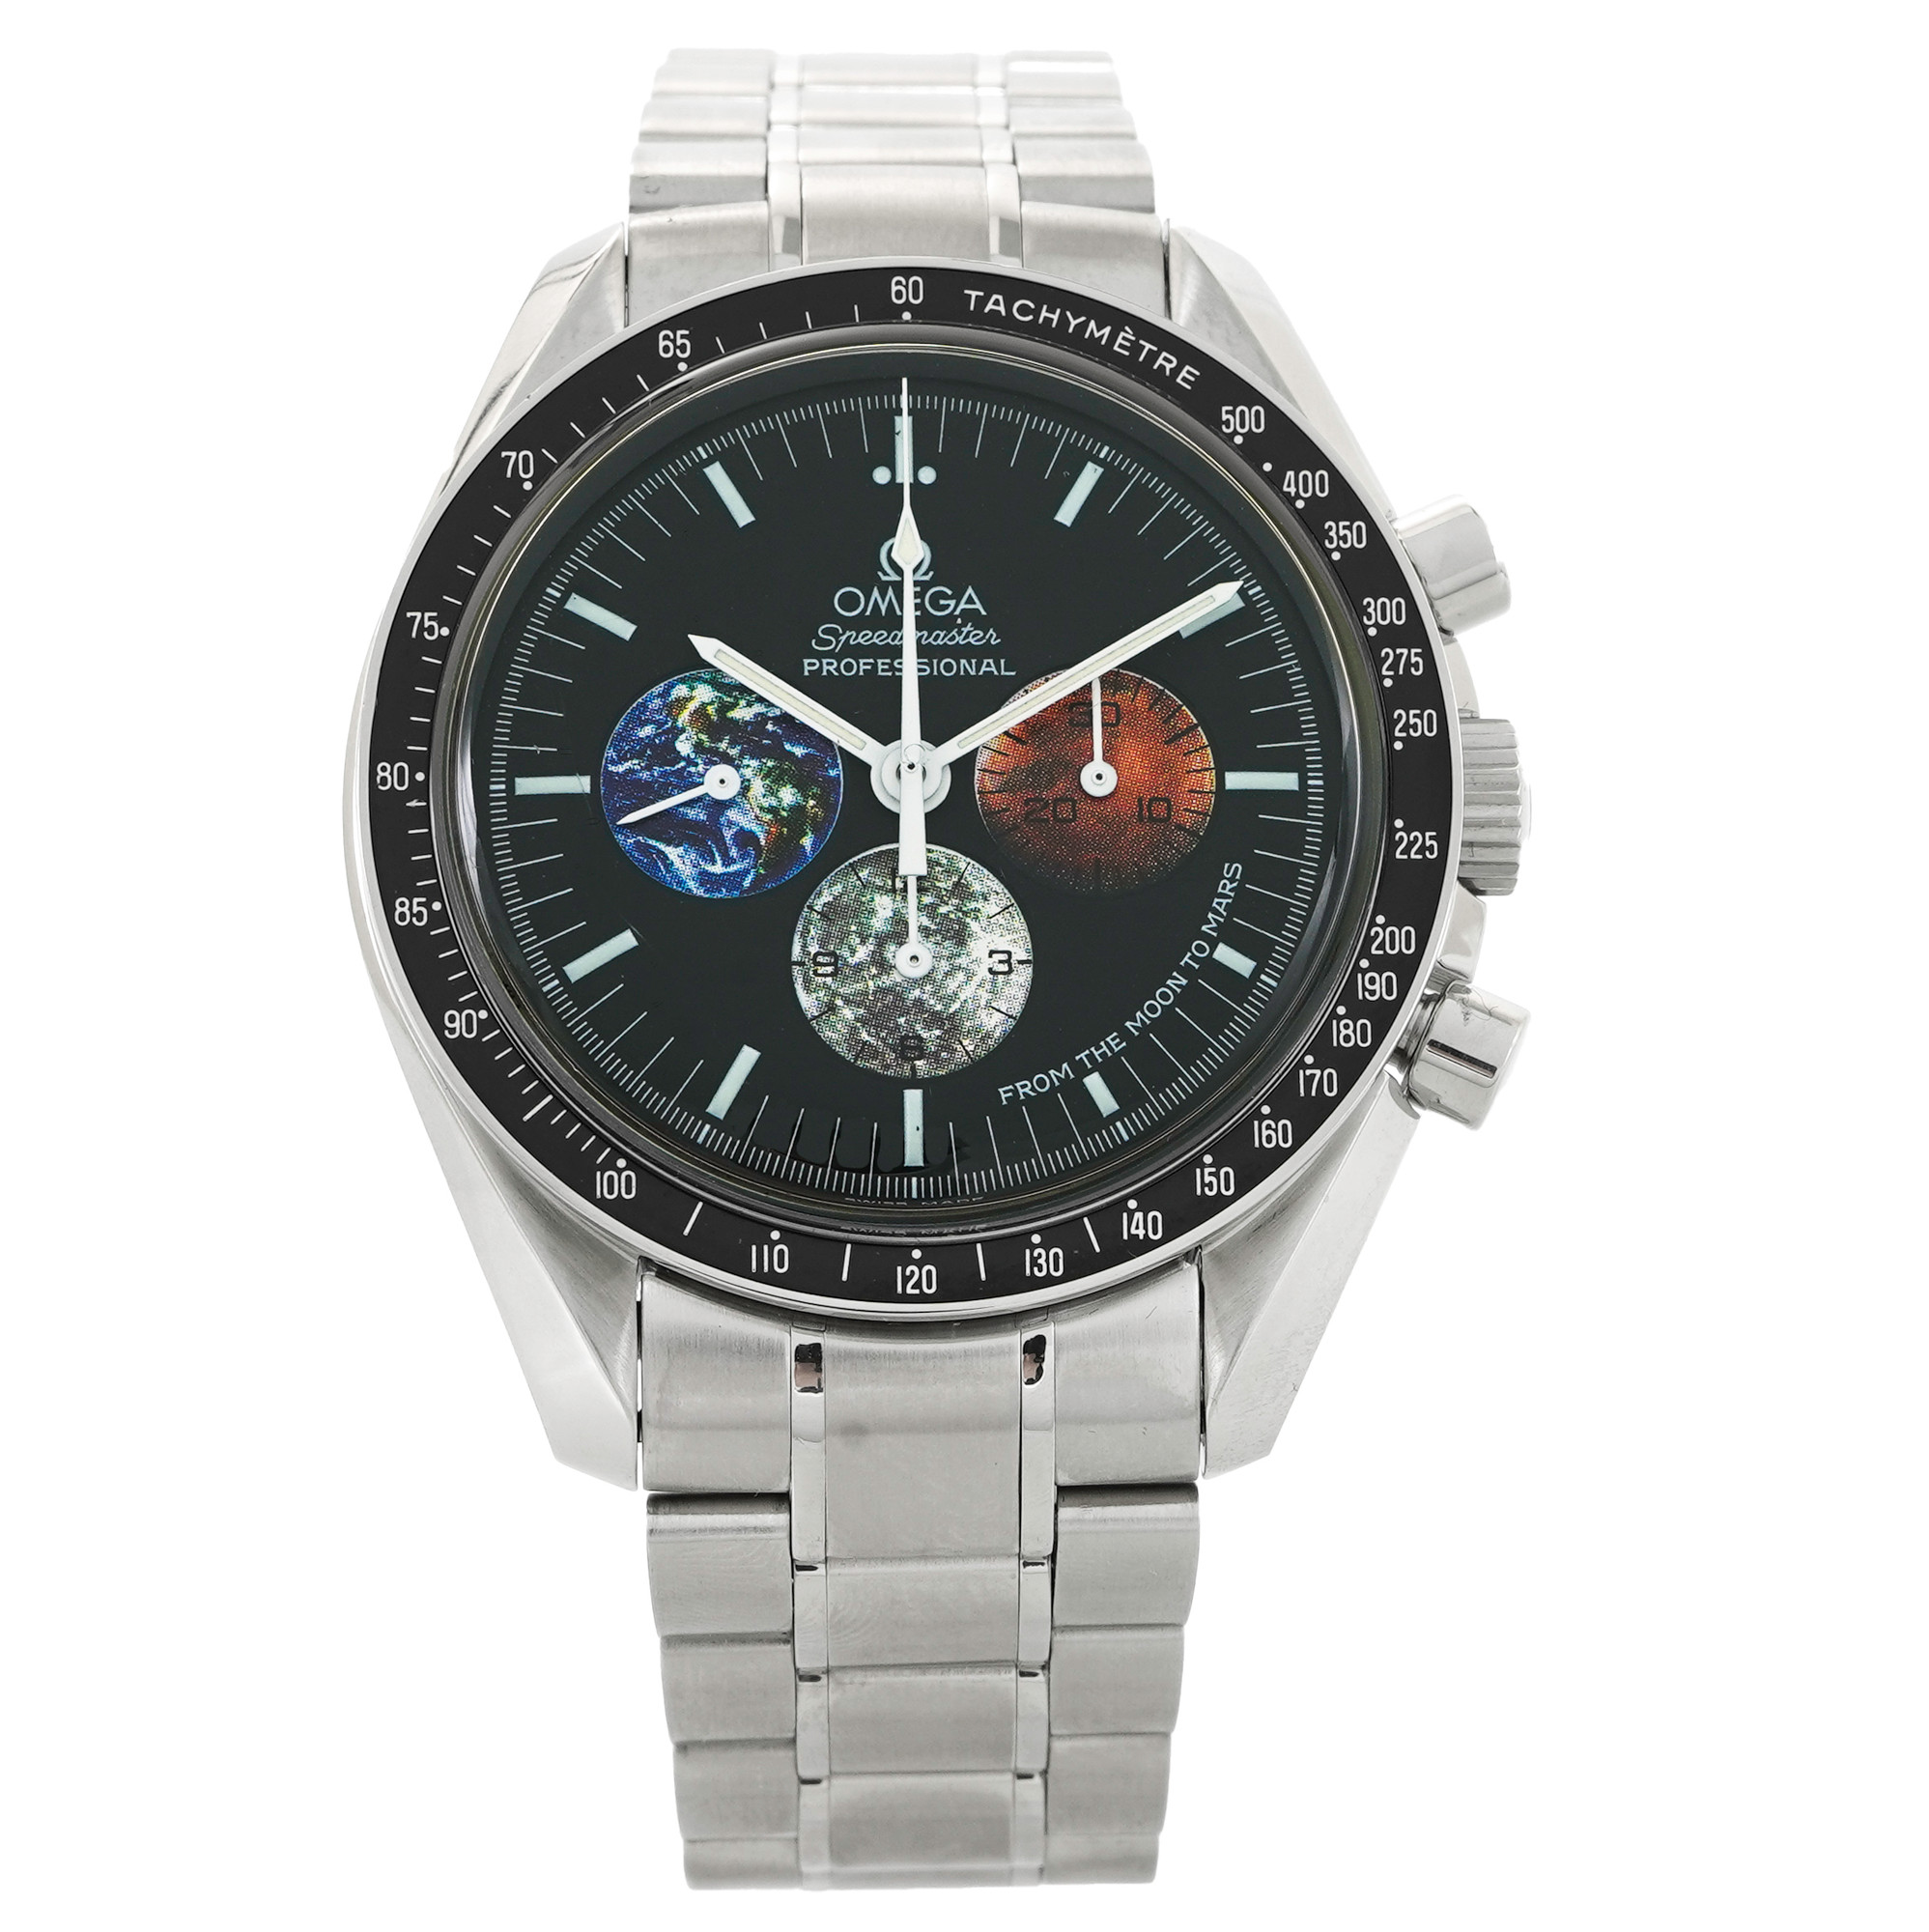 Omega Speedmaster Professional "From Moon to Mars" 3577.50.00 - Inventory 5568